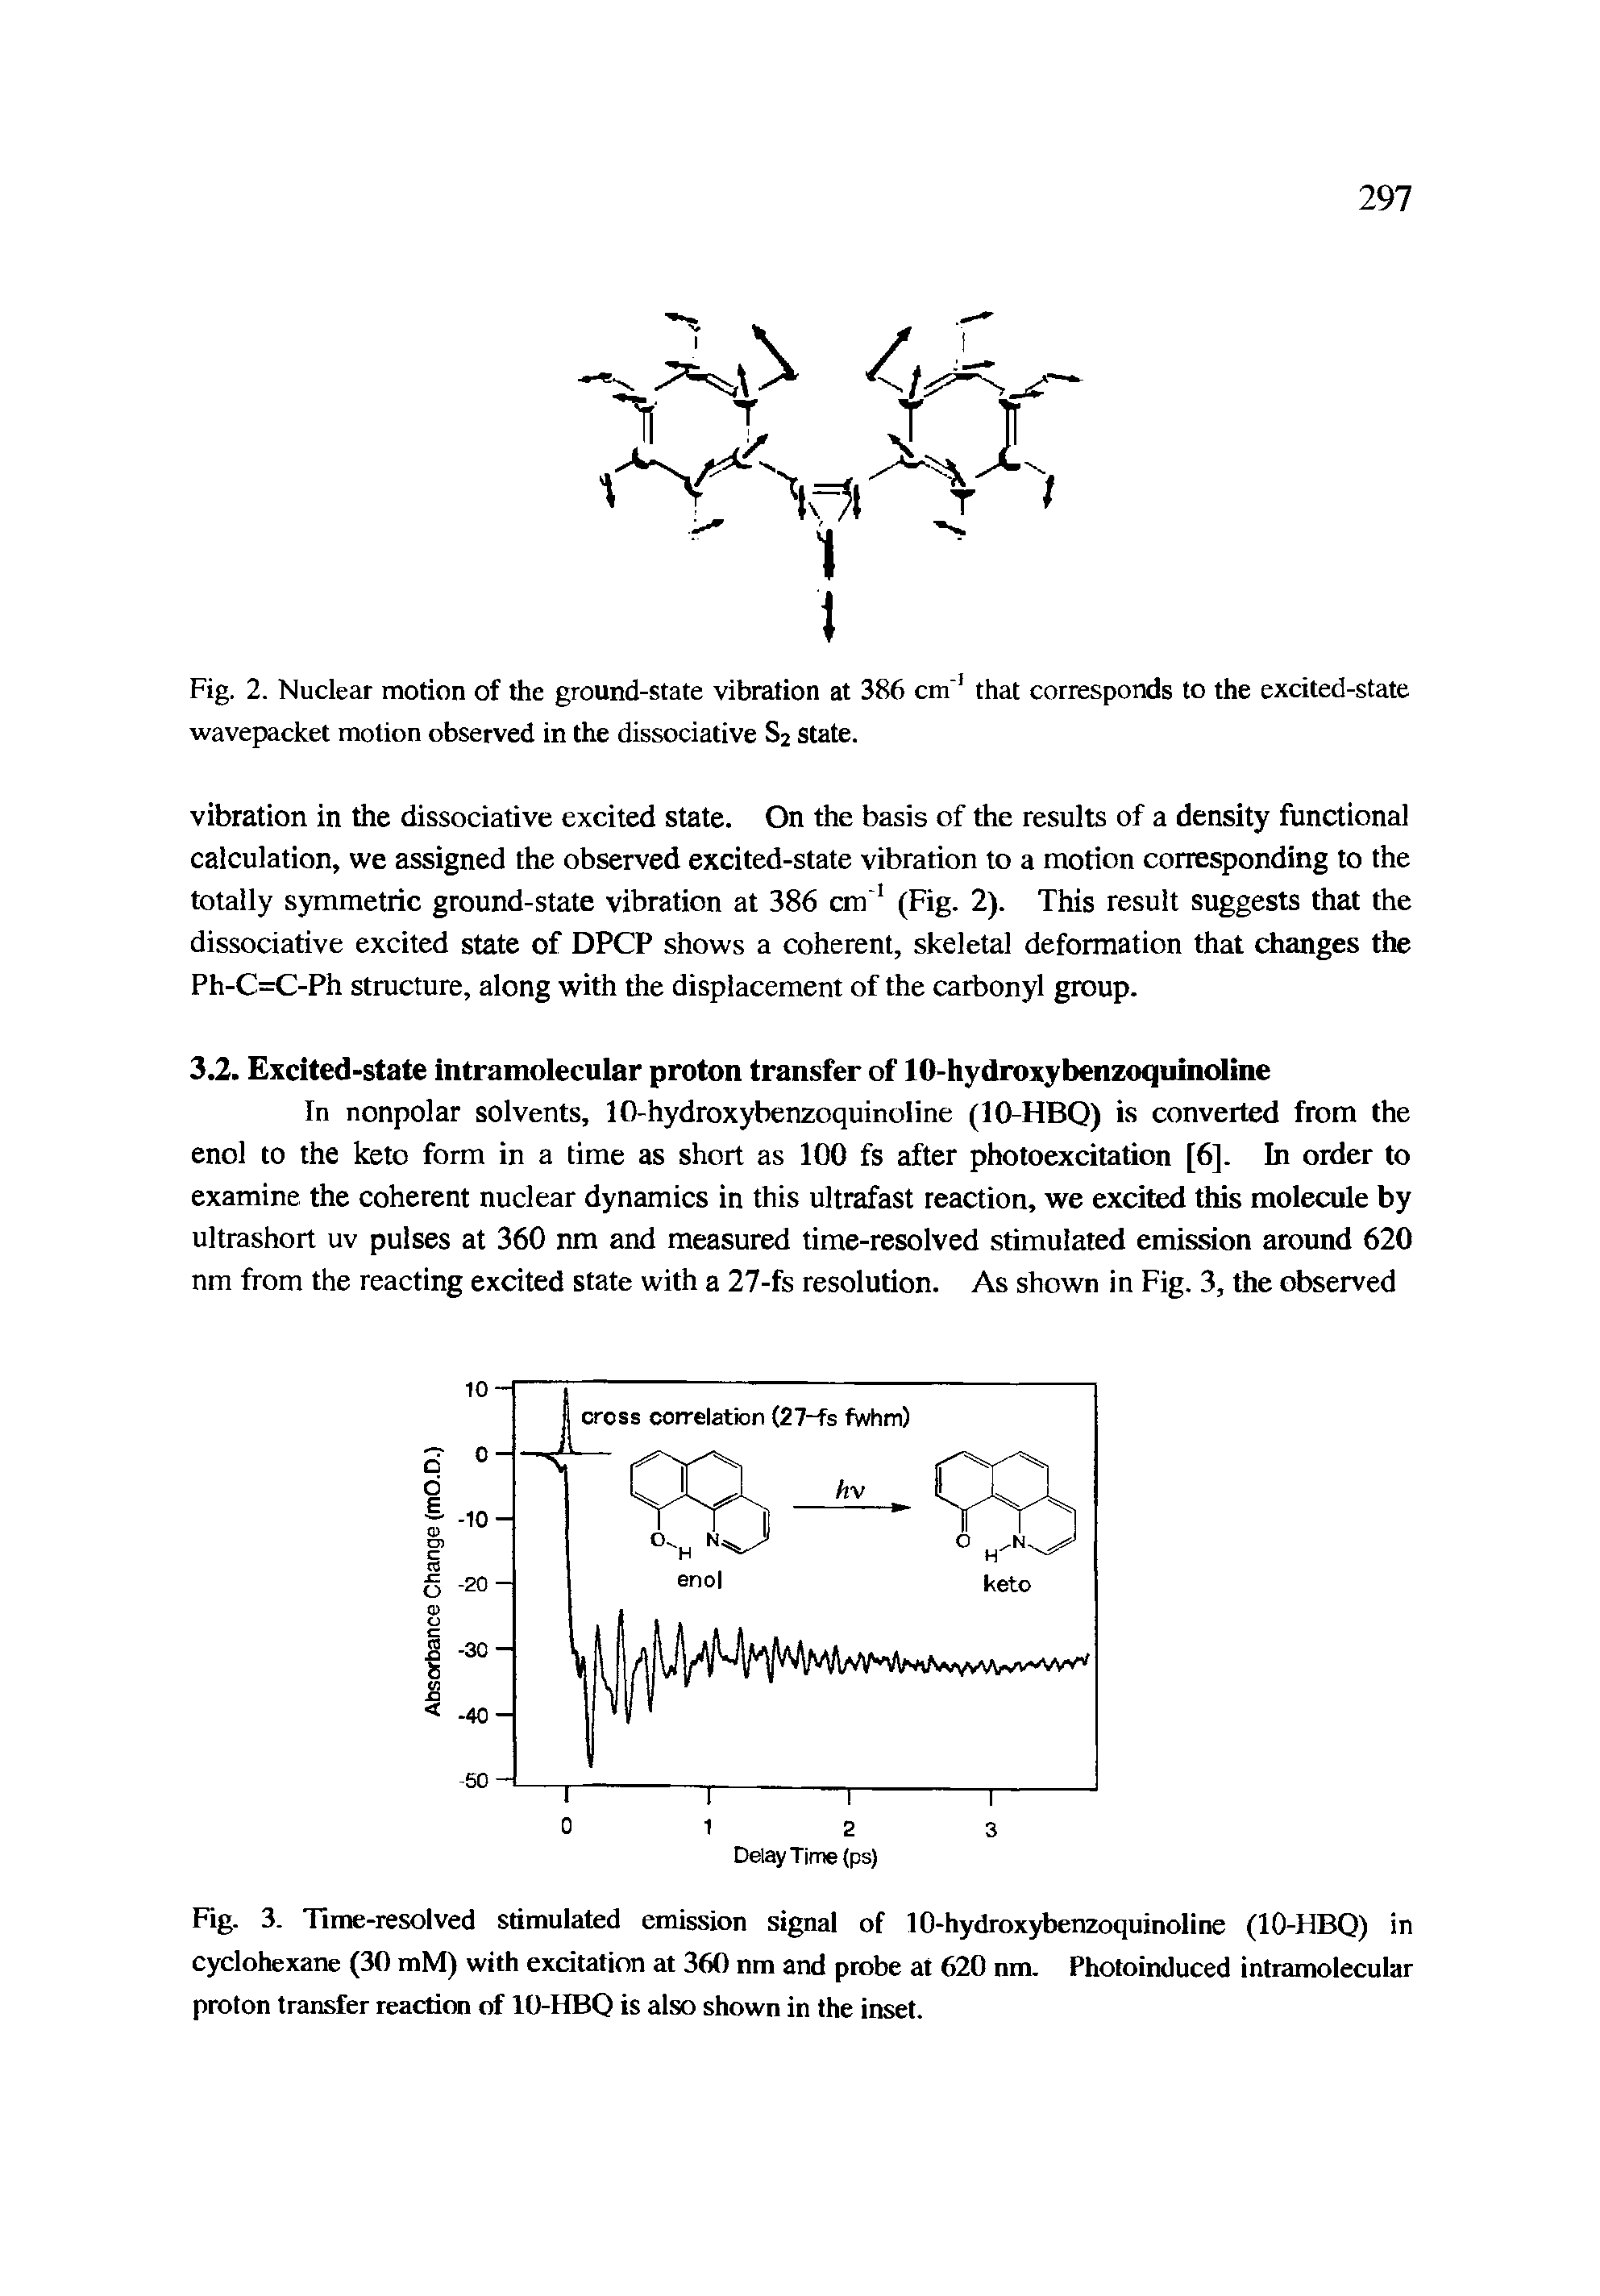 Fig. 3. Time-resolved stimulated emission signal of 10-hydroxybenzoquinoline (10-HBQ) in cyclohexane (30 mM) with excitation at 360 nm and probe at 620 nm. Photoinduced intramolecular proton transfer reaction of 10-HBQ is also shown in the inset.